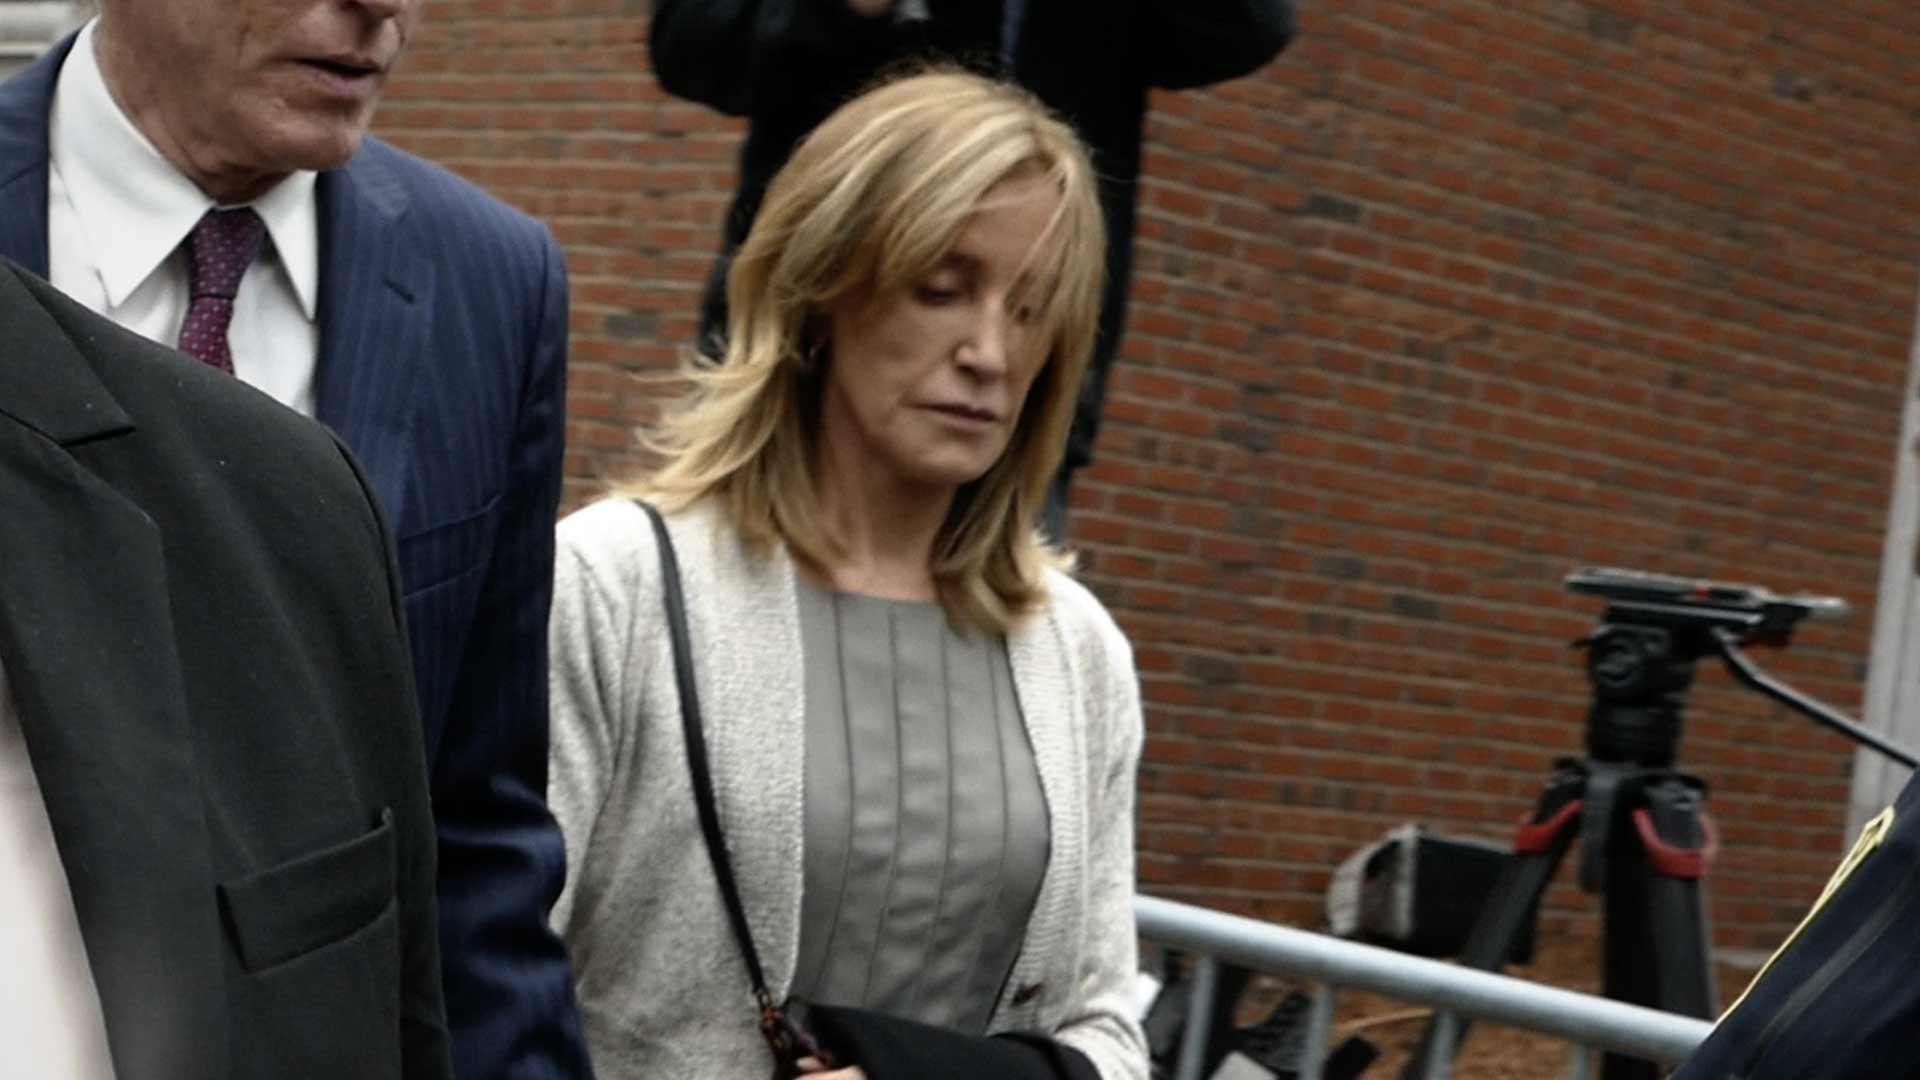 Felicity Huffman Tears Up as She Enters Guilty Plea in College Admissions Scandal